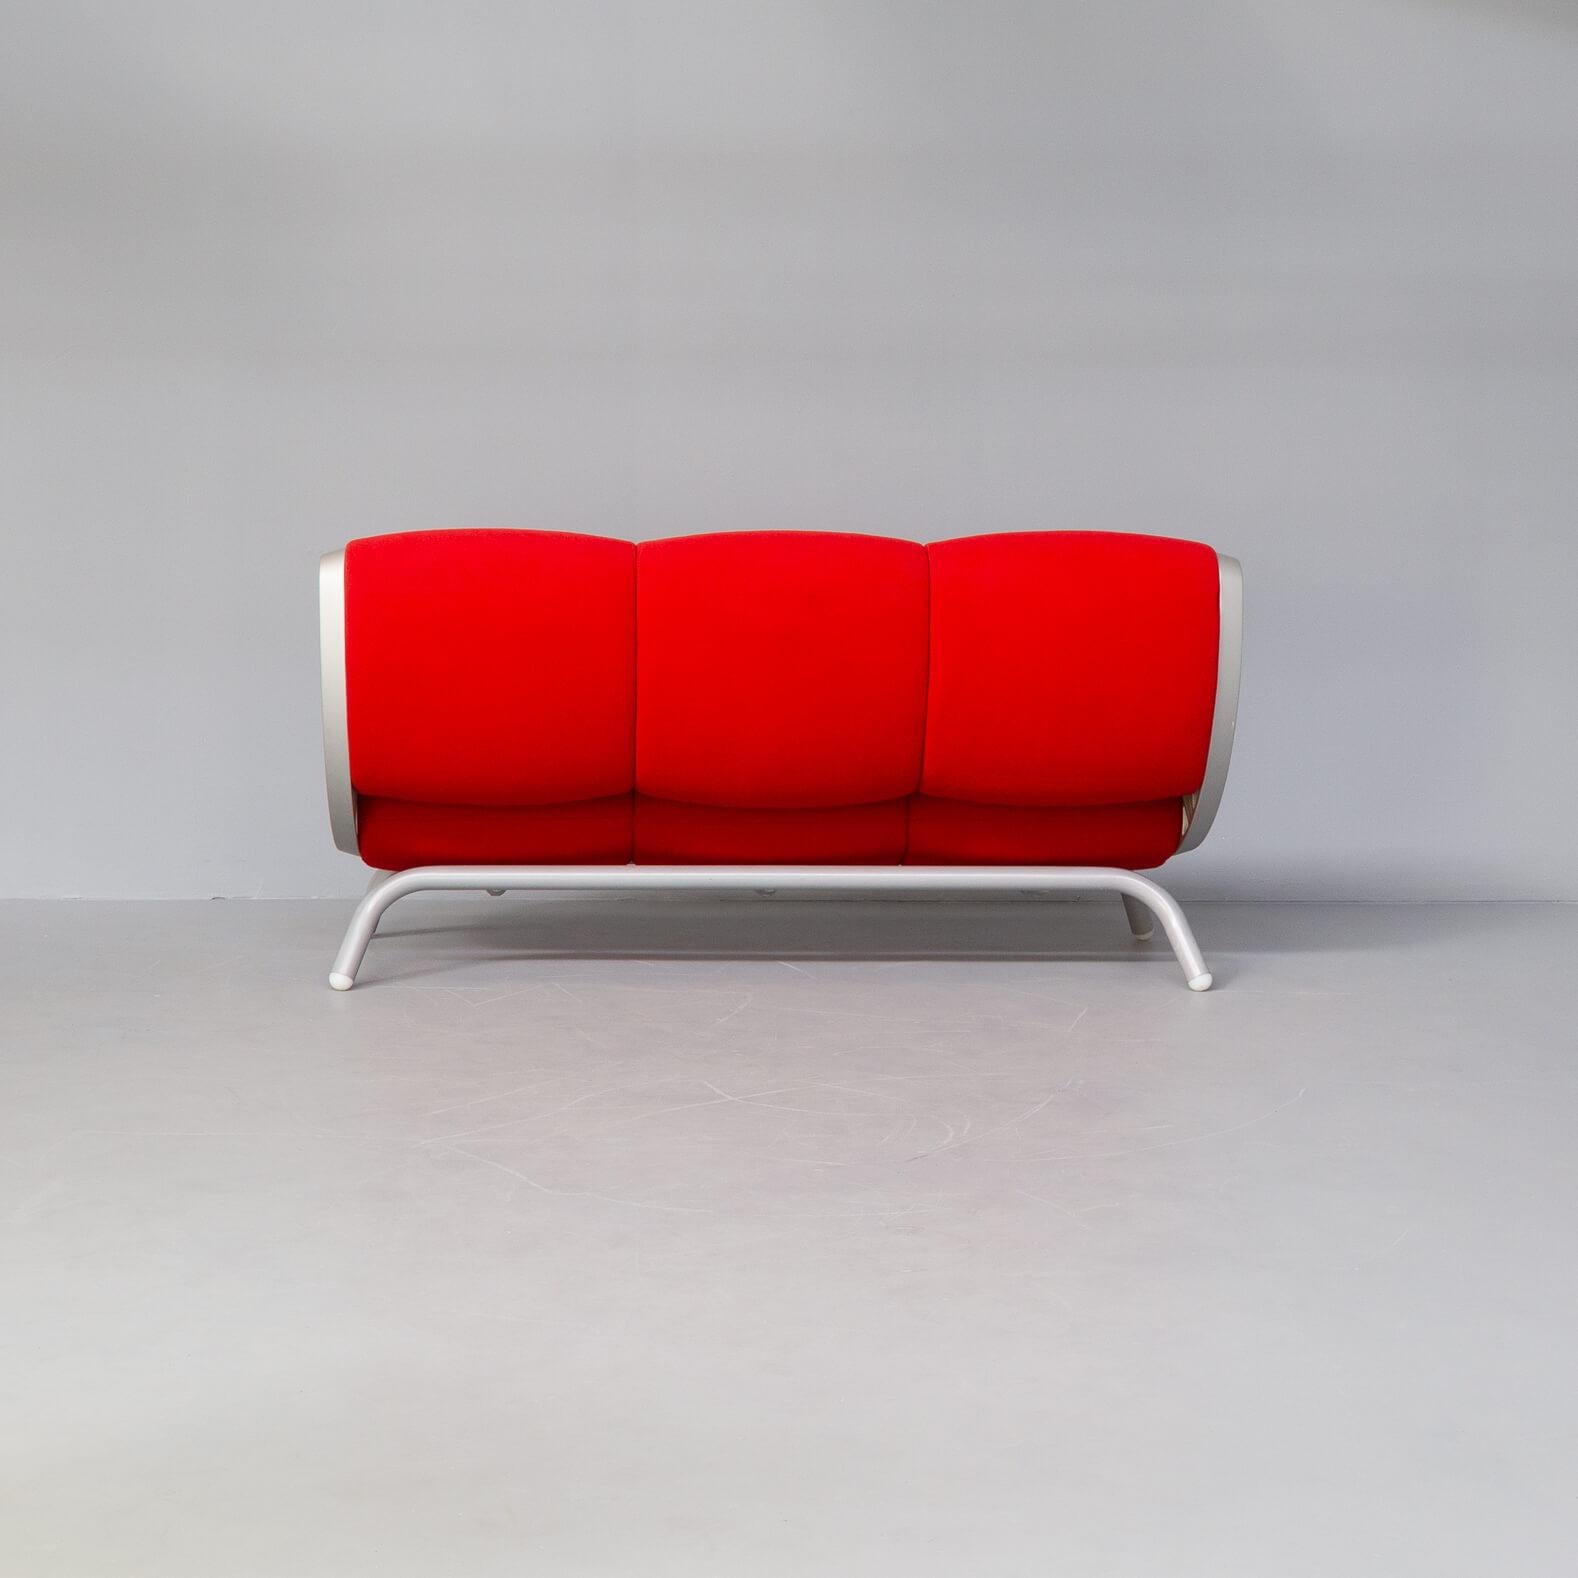 90s Marc Newson Gluon Three Seat Sofa for Moroso In Good Condition For Sale In Amstelveen, Noord